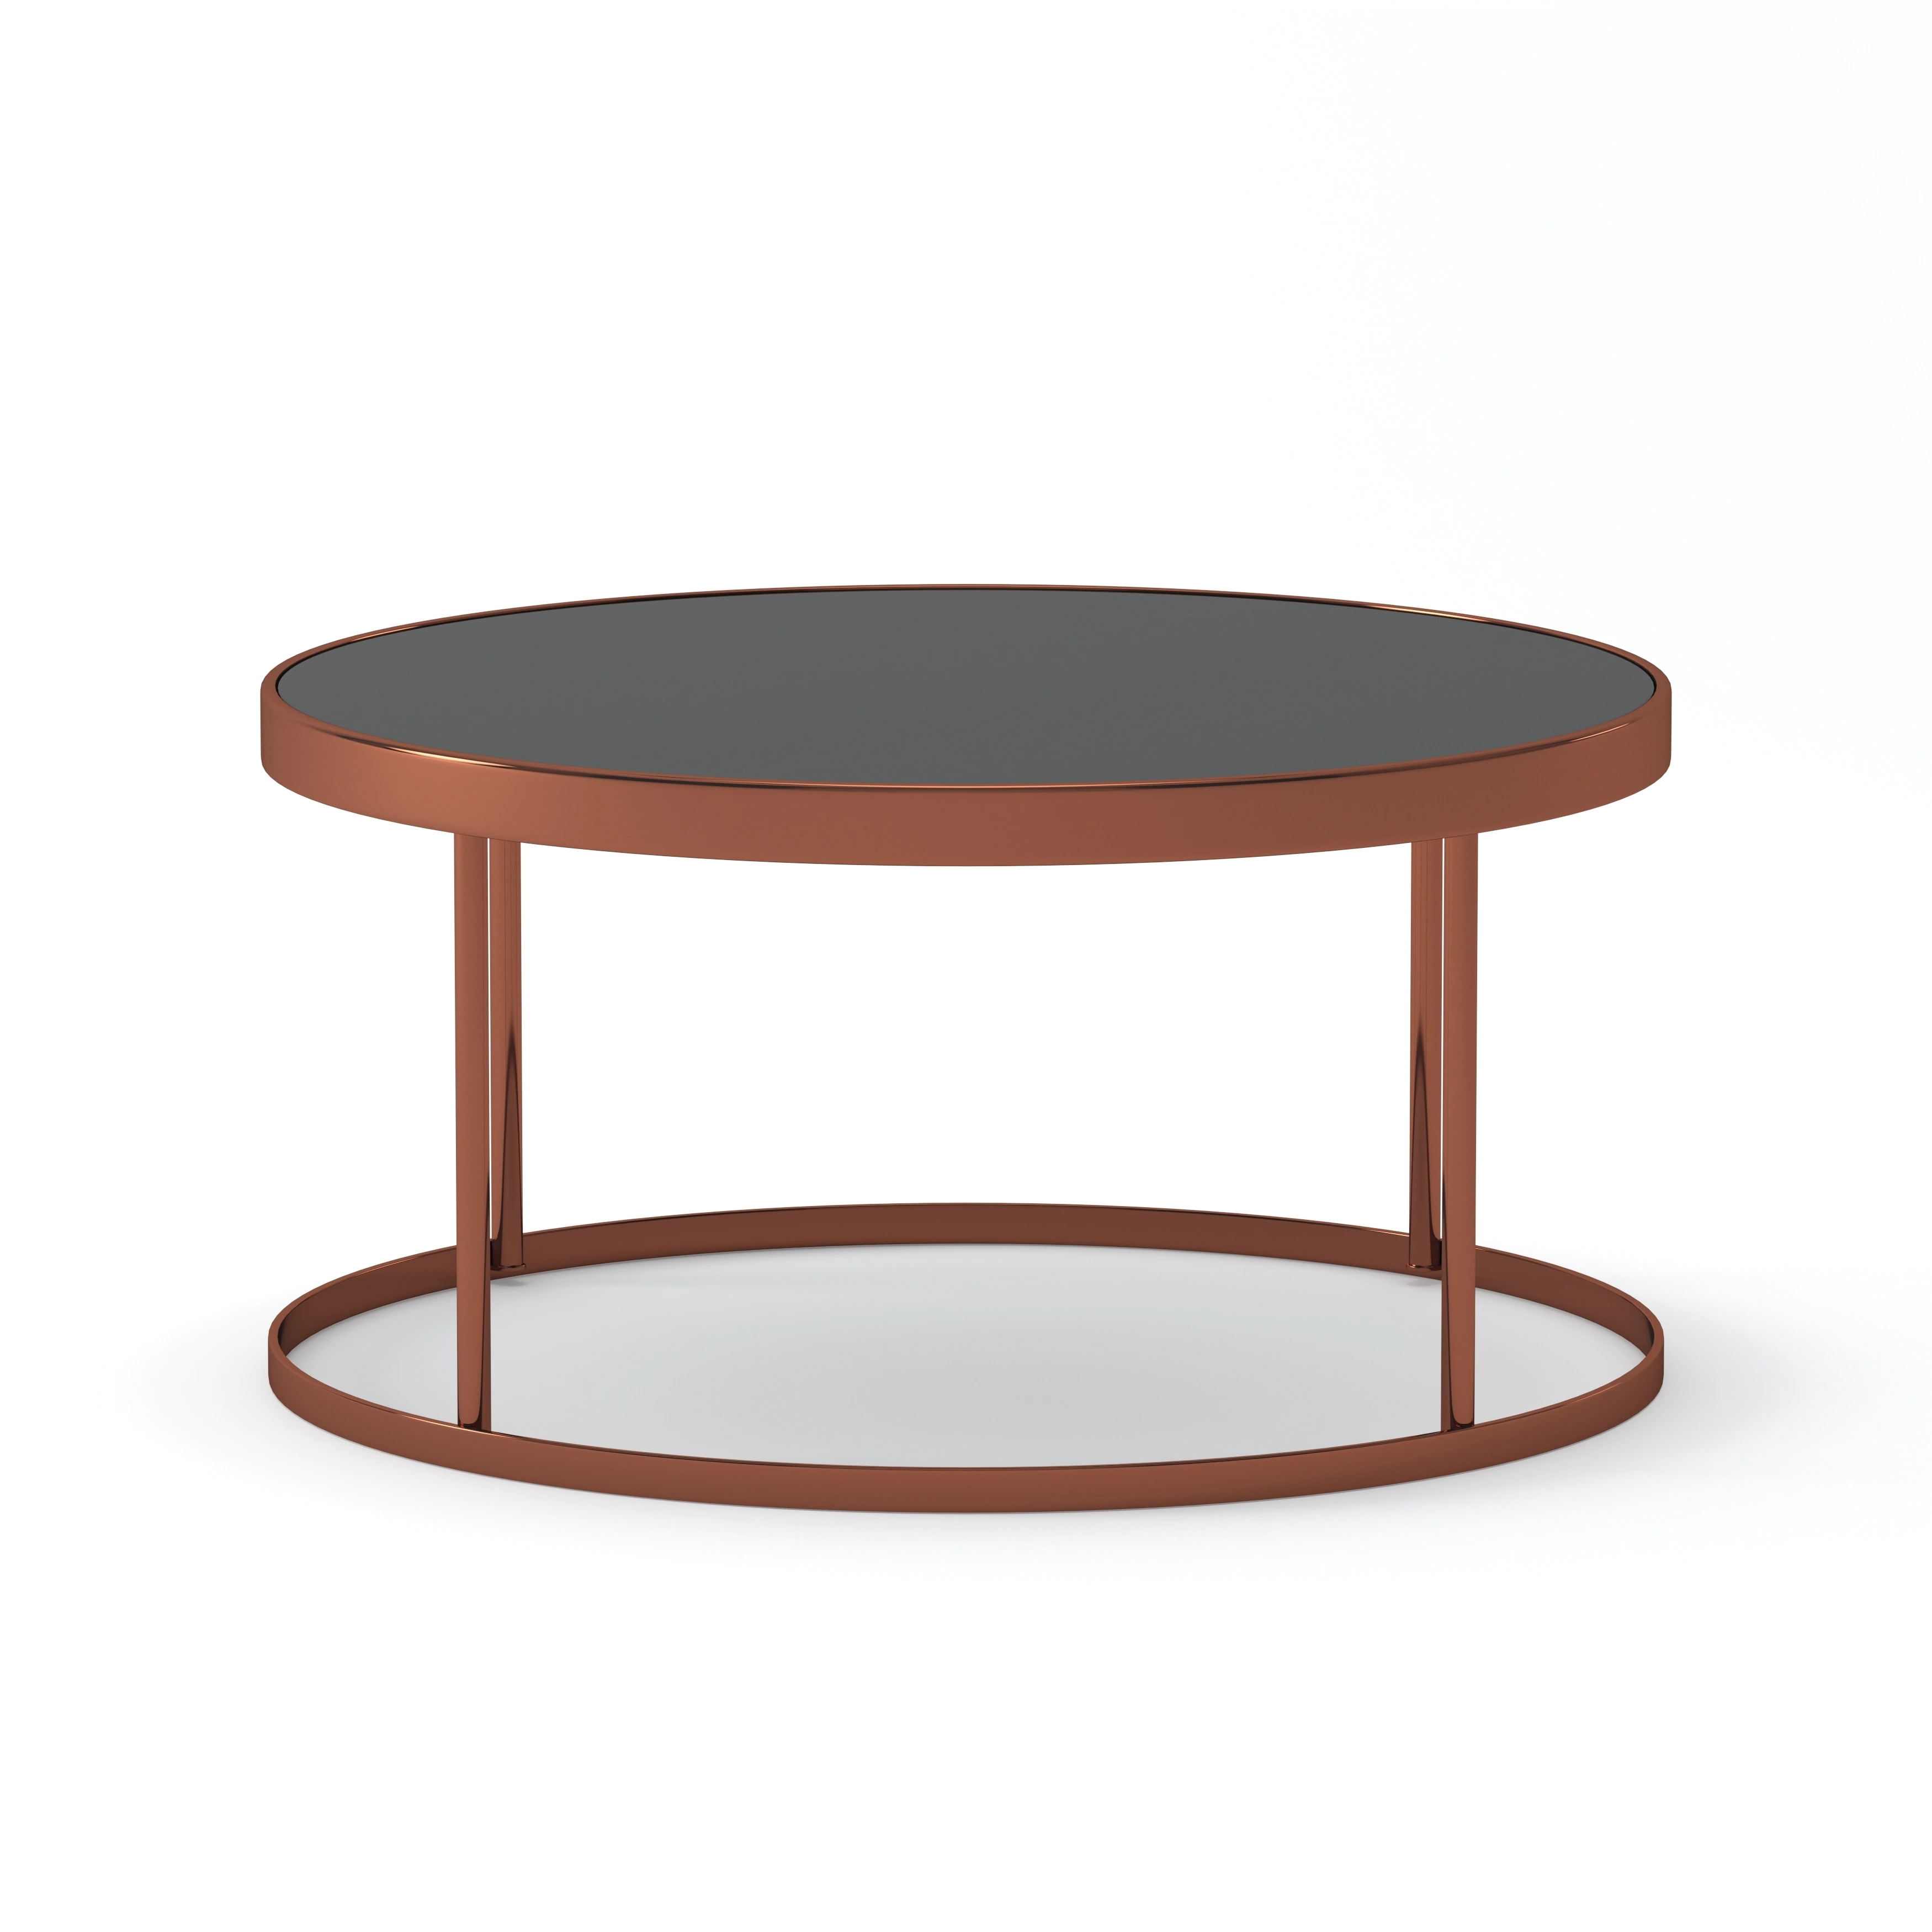 half moon accent table probably perfect awesome round coffee and furniture america rosina contemporary rose gold black mirrored end sets free shipping today covers dog kennel diy